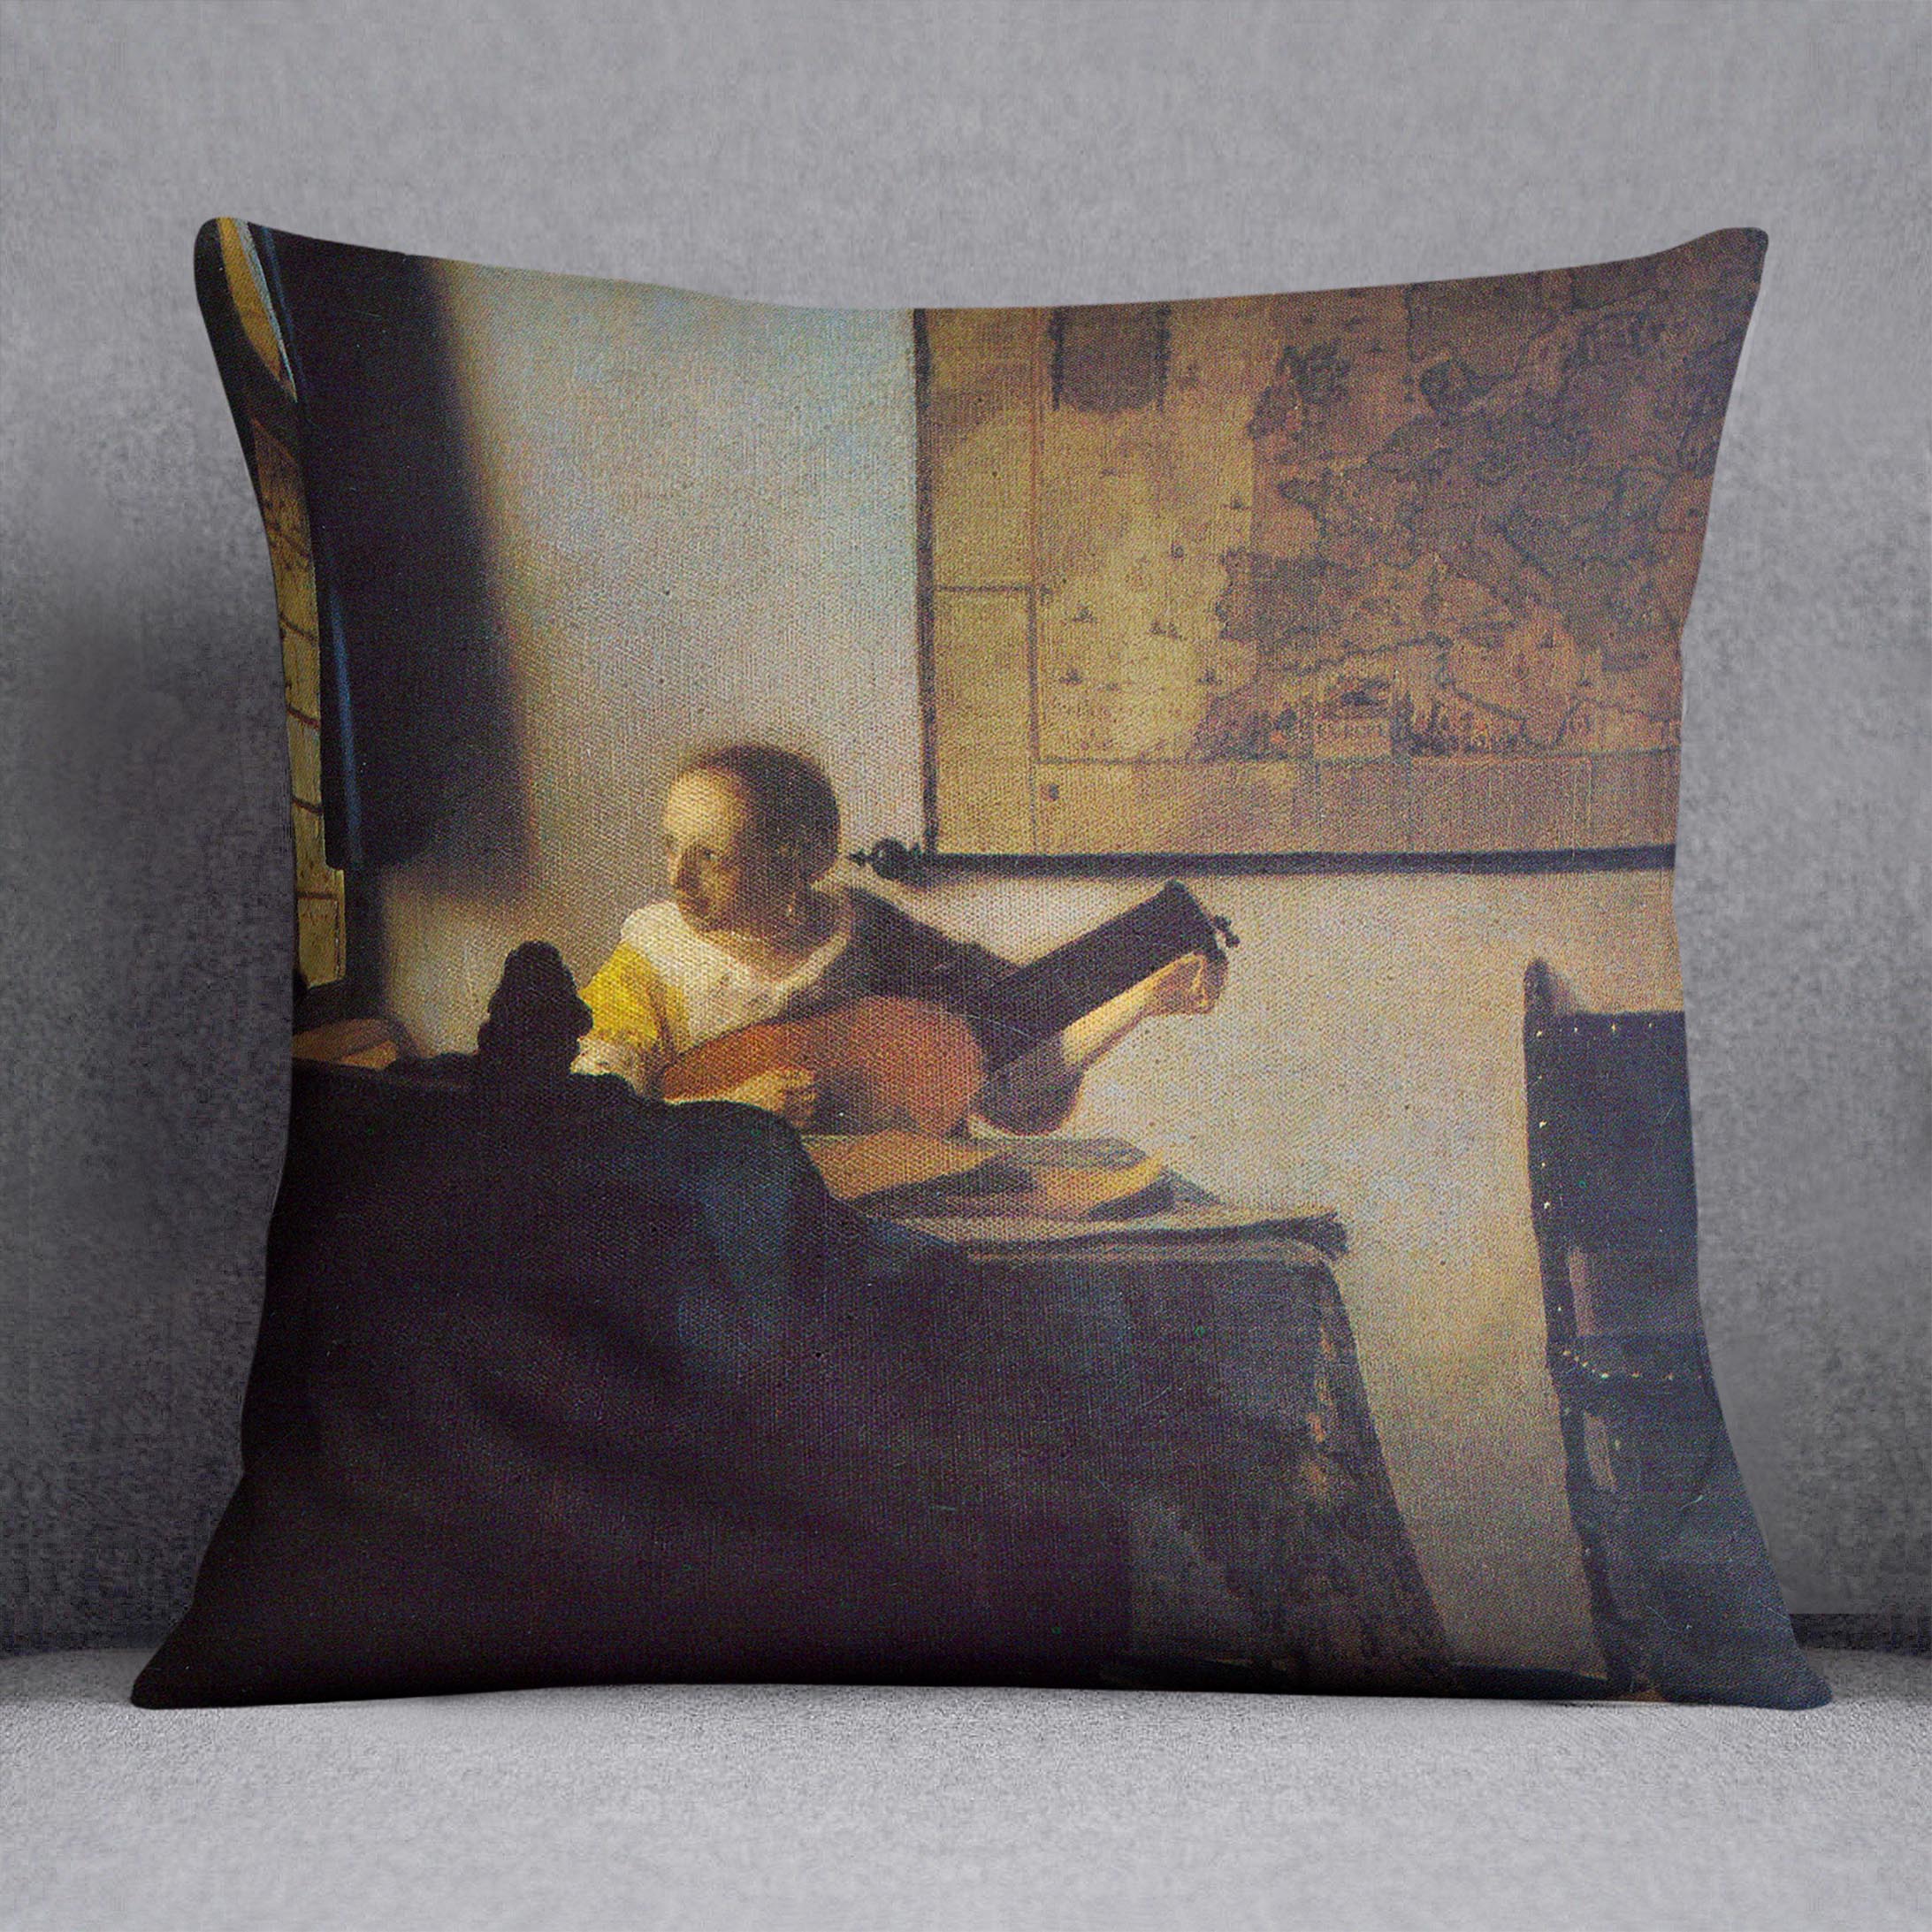 According to the player by Vermeer Cushion